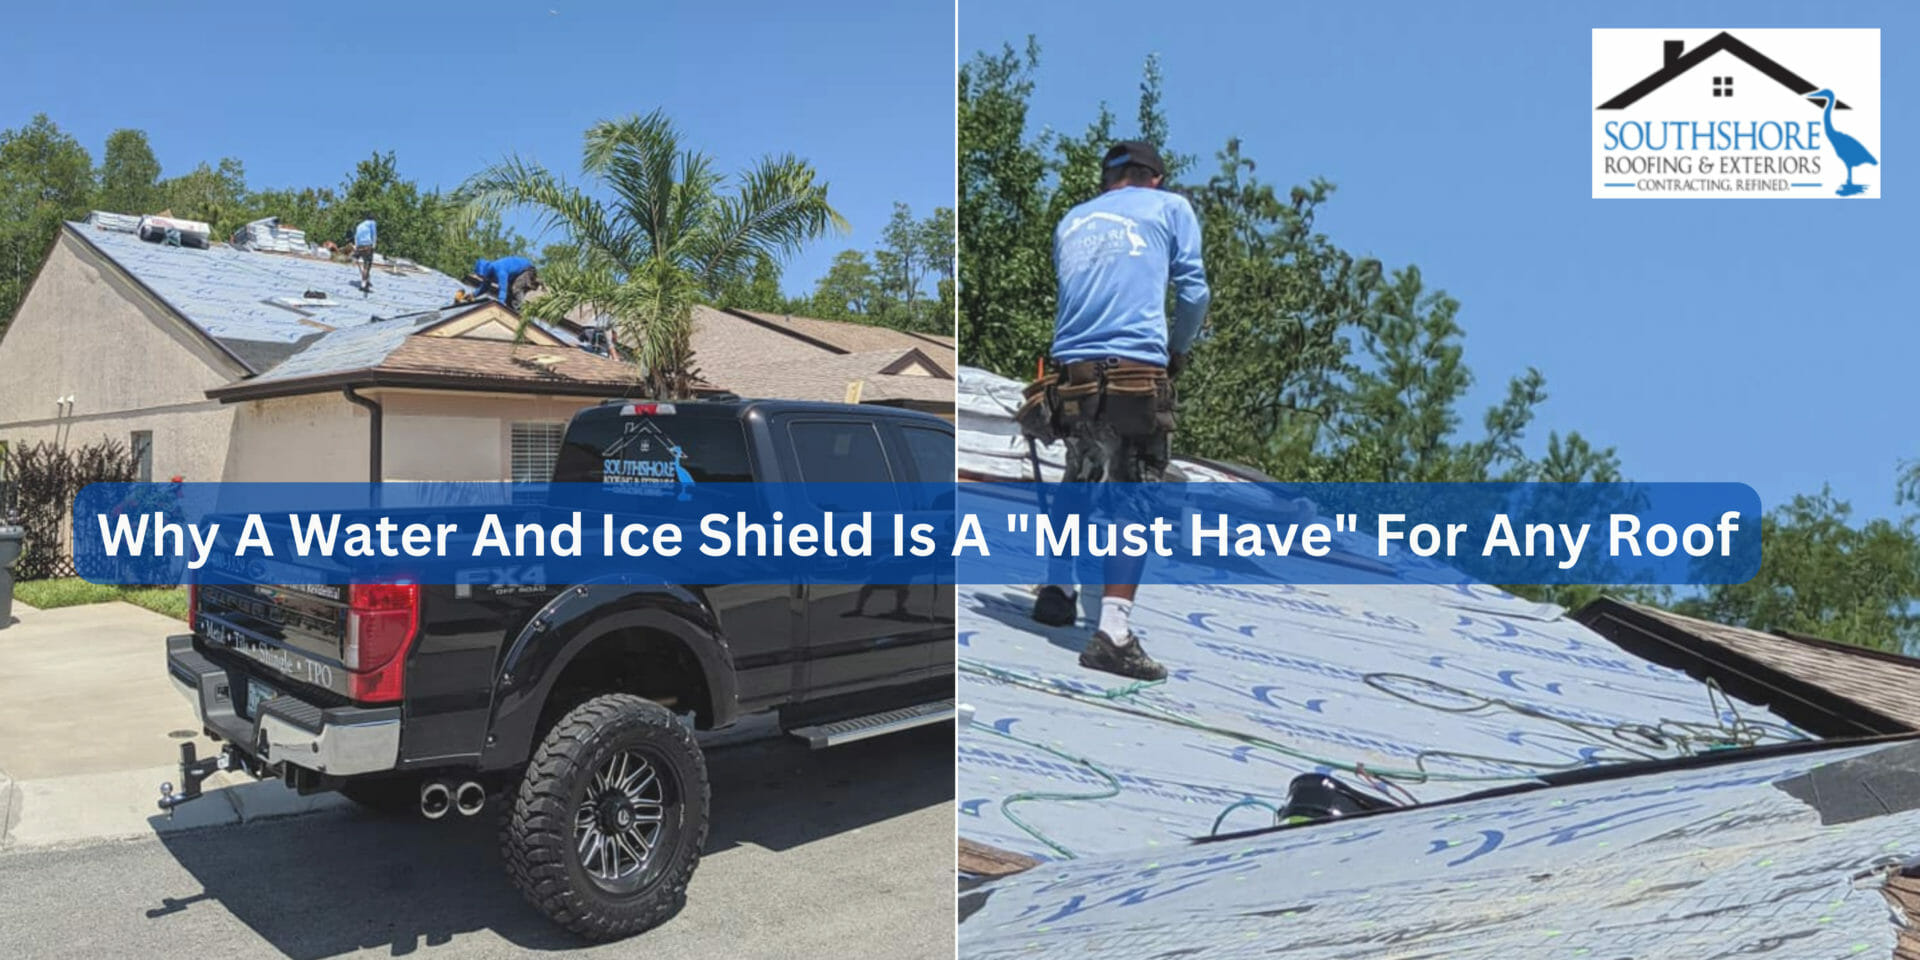 Why A Water And Ice Shield Is A “Must Have” For Any Roof